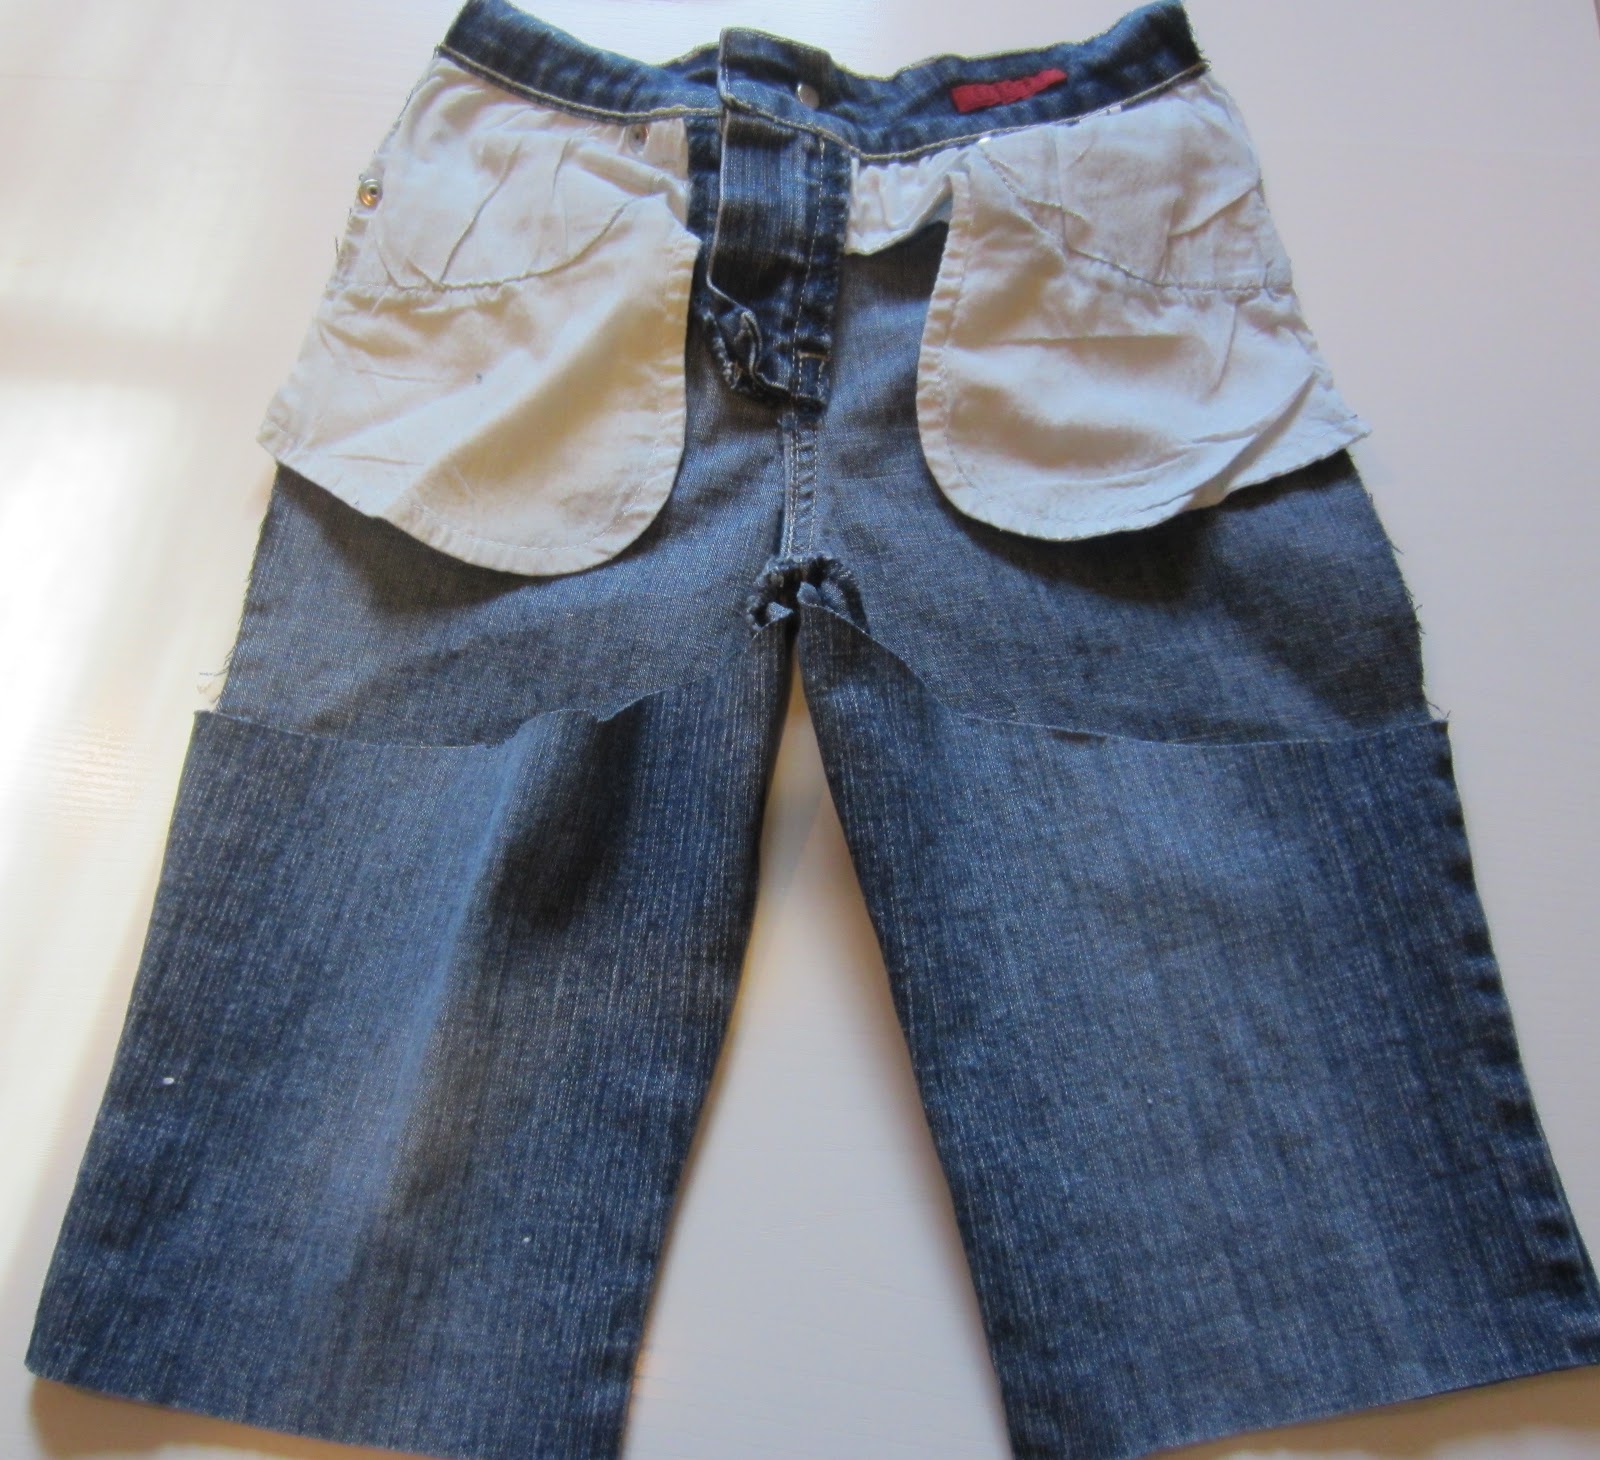 My Patchwork Quilt: CHILD'S DENIM SKIRT FROM A PAIR OF JEANS